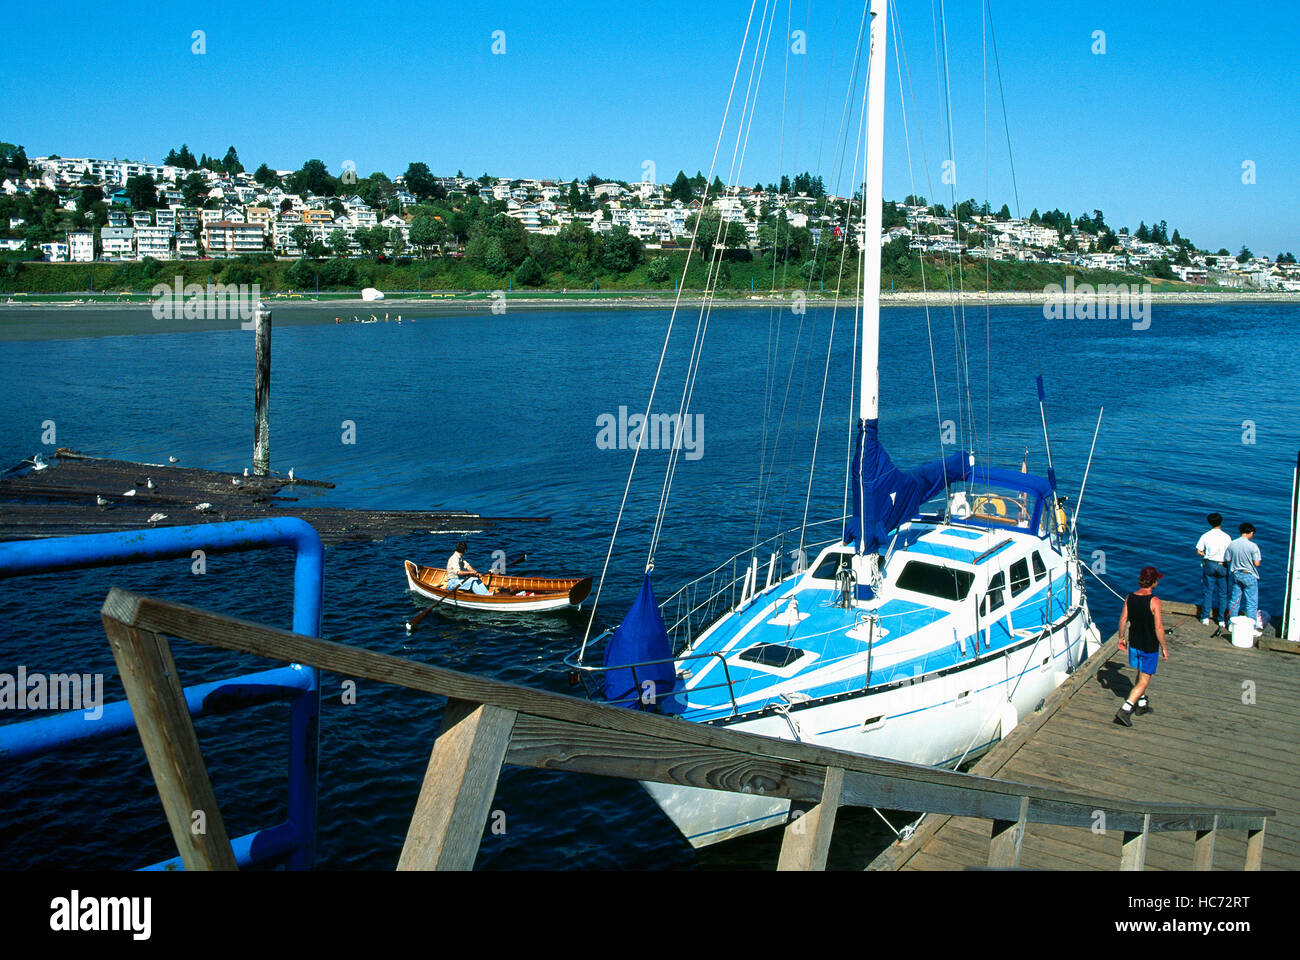 White Rock, BC, British Columbia, Canada - Sailboat docked at Pier in Semiahmoo Bay and Pacific Ocean Stock Photo